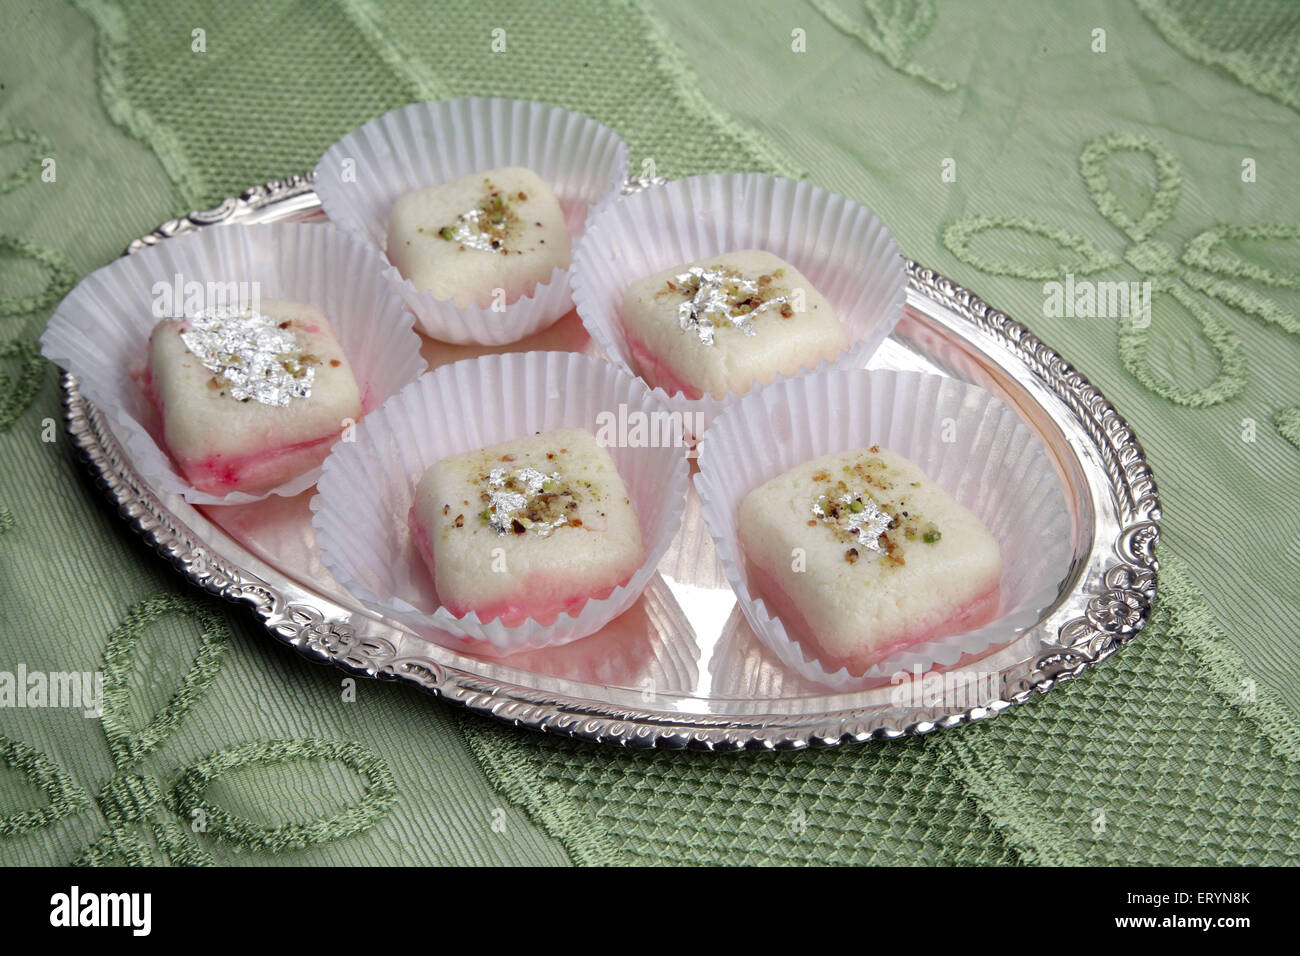 Bengali malai sandwich sweet in white paper cups on Silver plate India PR#743AH Stock Photo